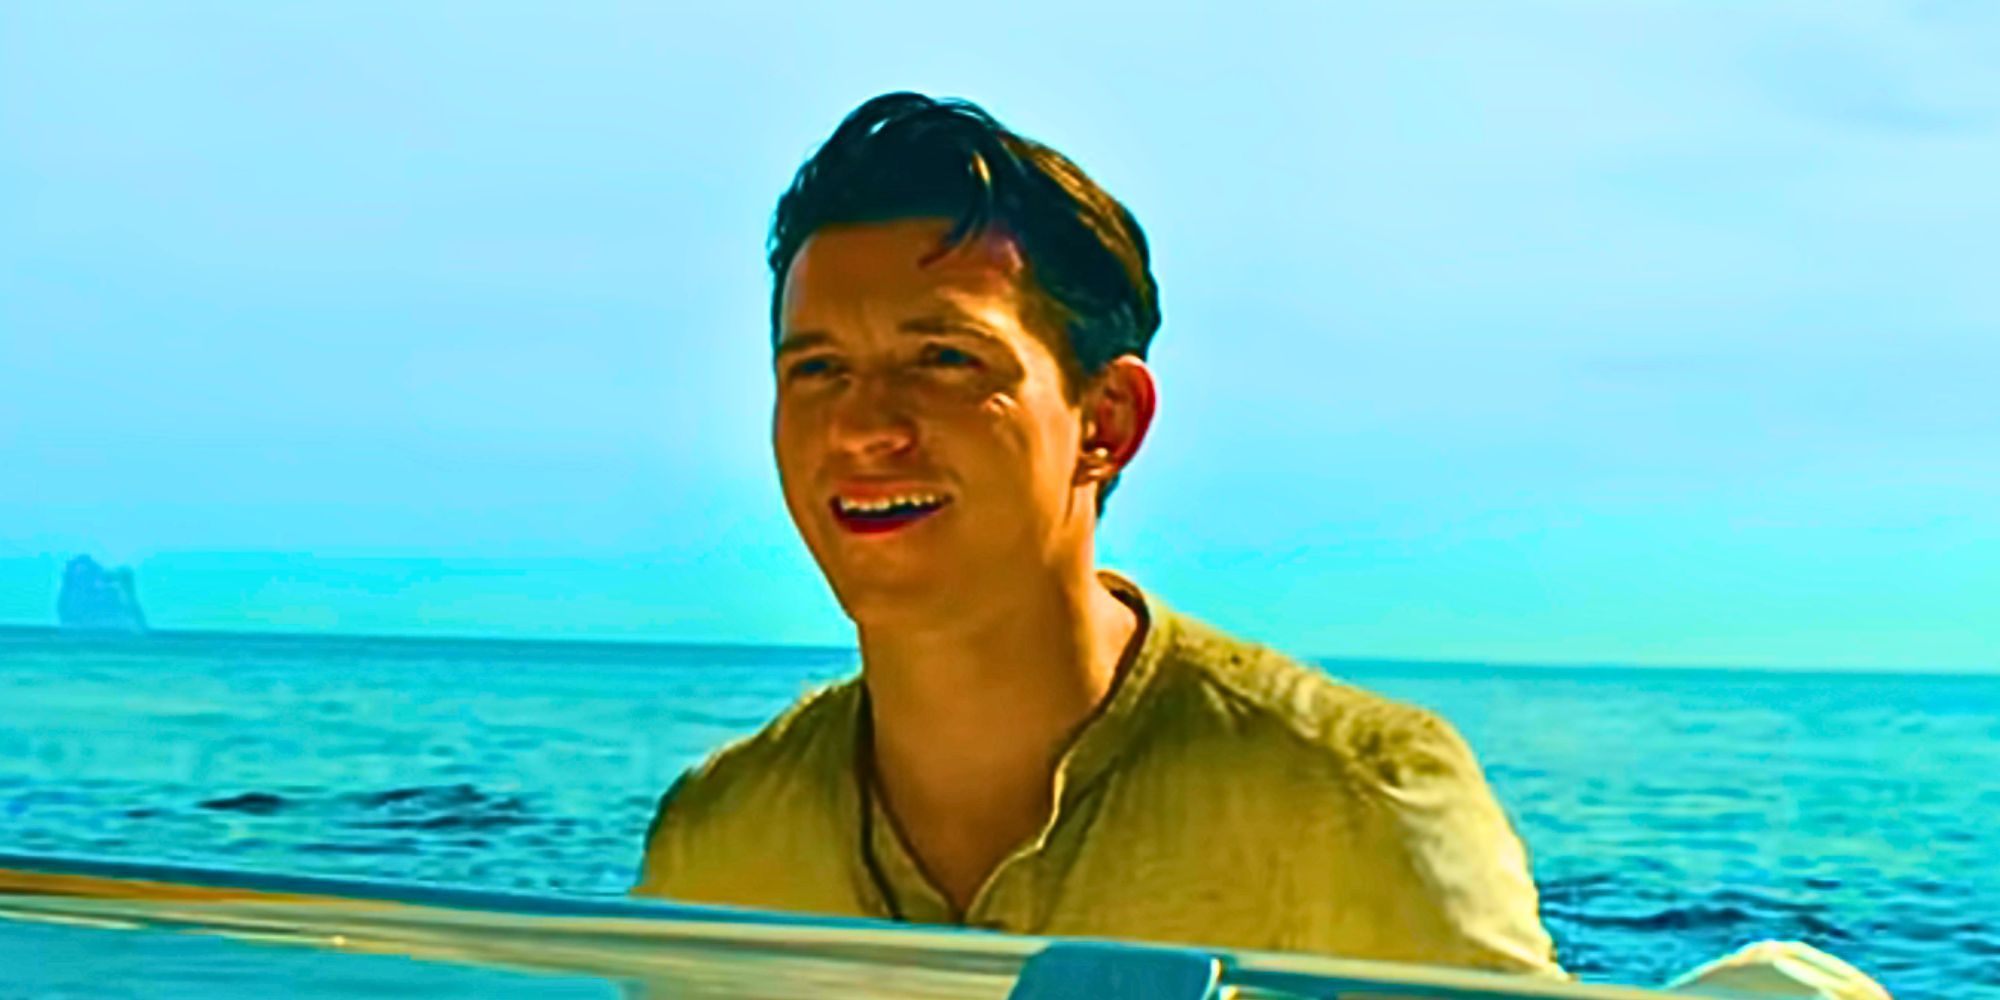 Tom Holland smiling as Nathan Drake in Uncharted